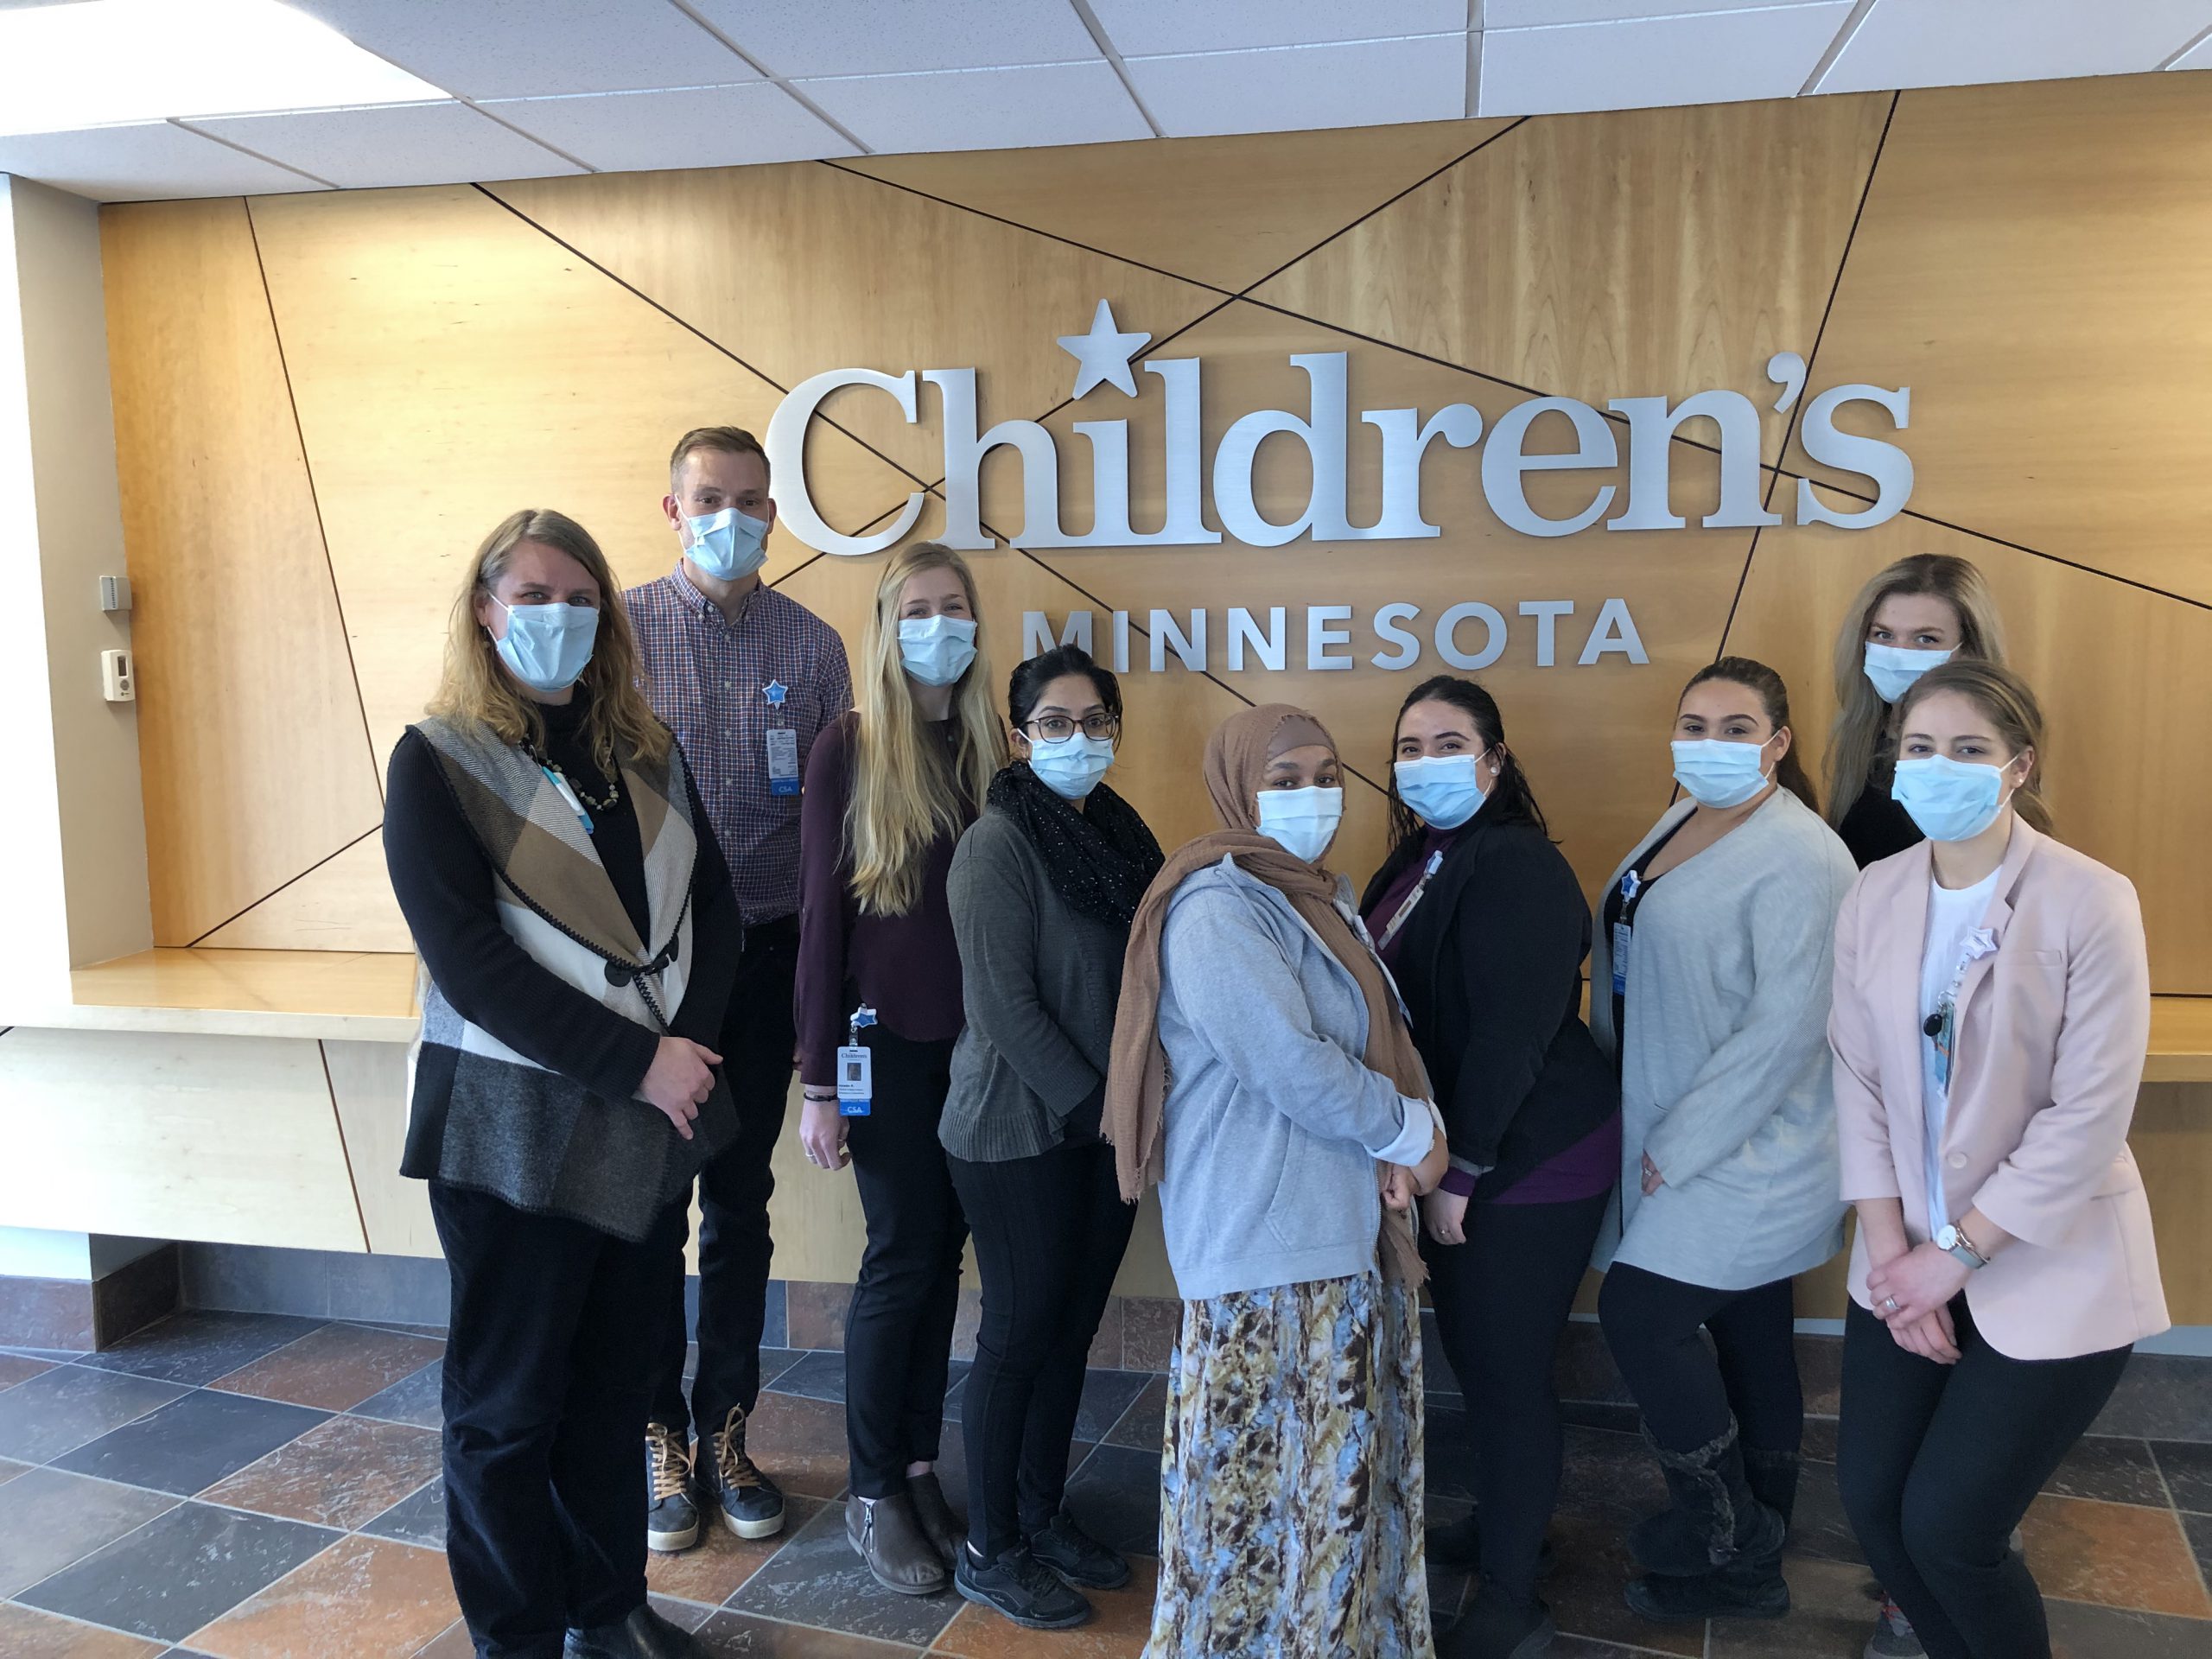 Nine CSAs stand in front of a Children's Minnesota sign. They're all wearing clinical masks.